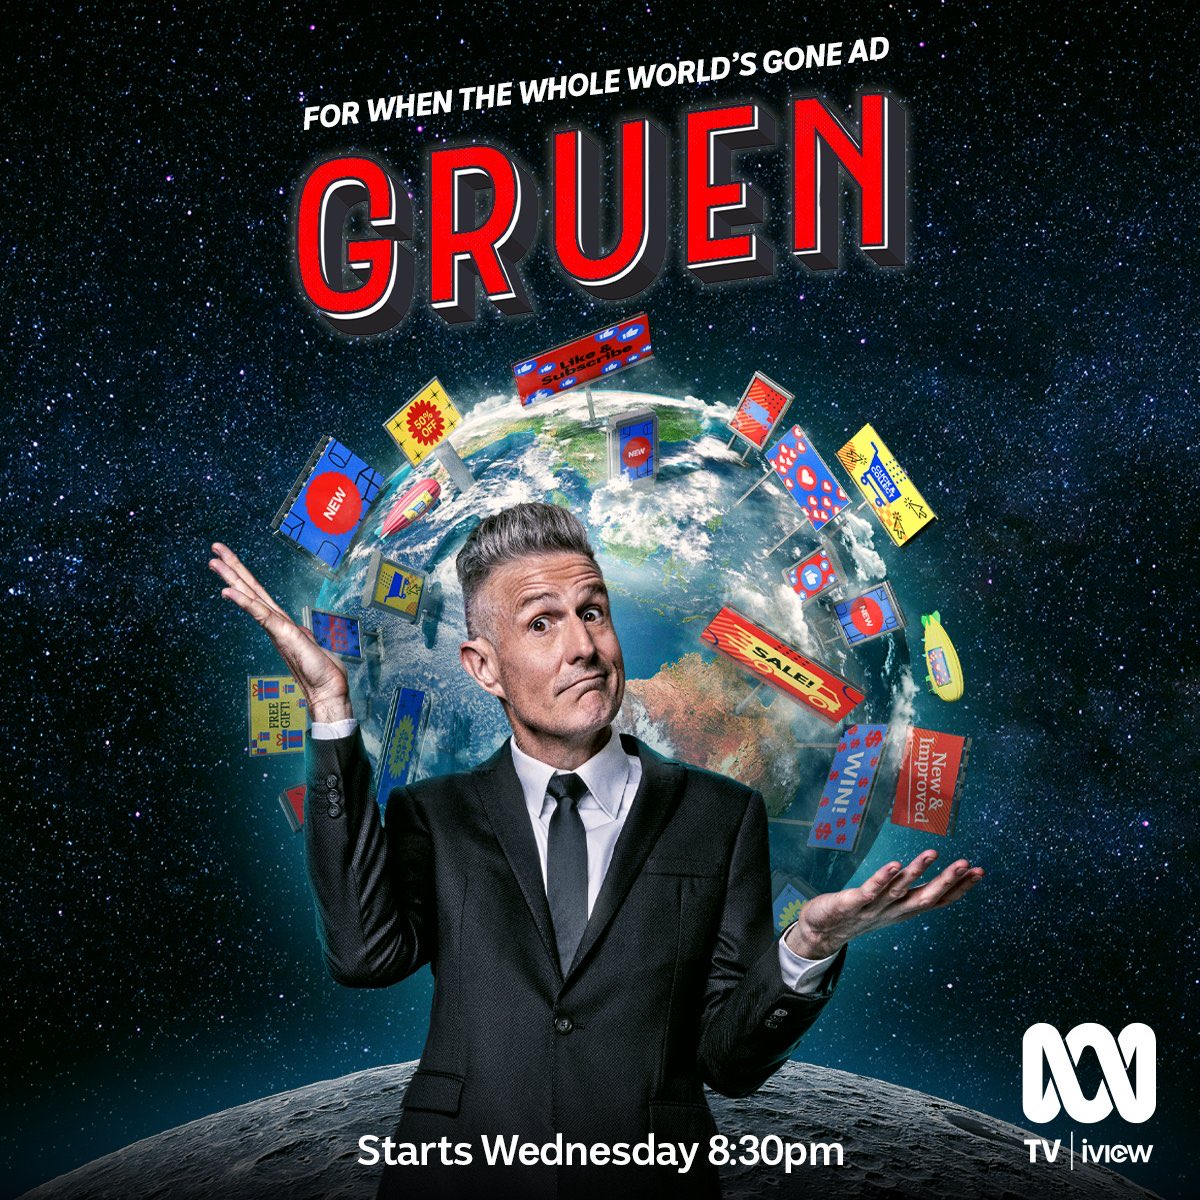 📺 #Gruen returns to ABC TV for Season 16, Wednesday at 8:30pm

Then, also available on #ABCiView